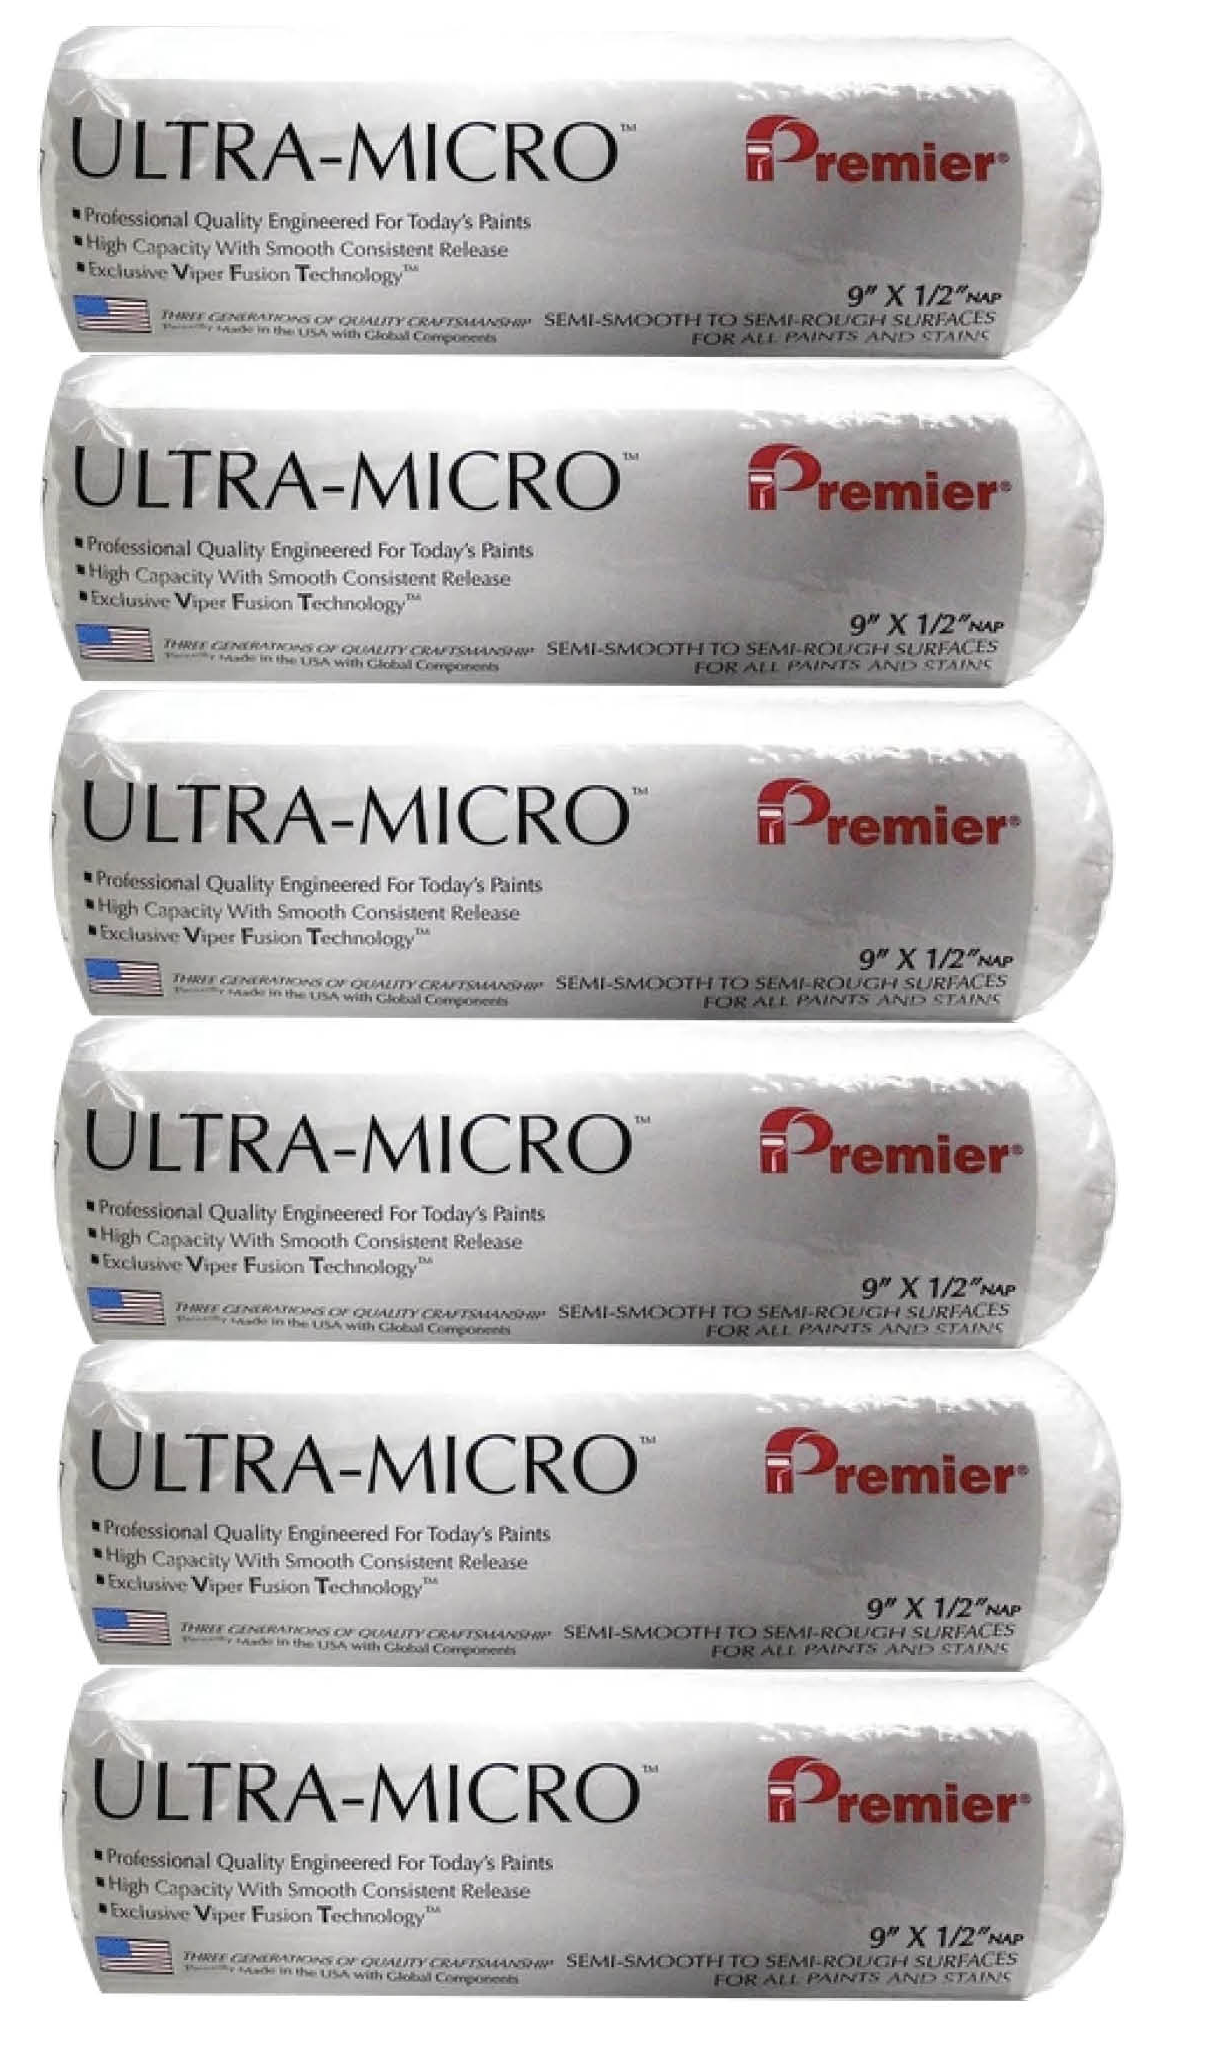 Premier Ultra-Micro 9" X 1/2" Roller Sleeve USA (Pack of 6)